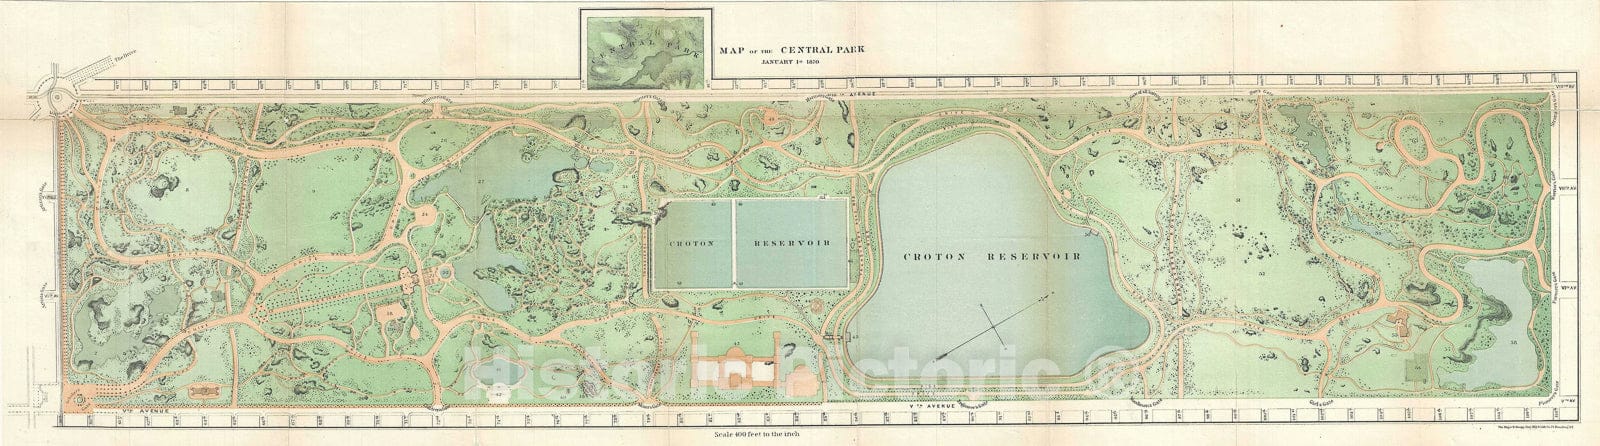 Historic Map : Central Park, New York City, Vaux and Olmstead, 1870, Vintage Wall Art